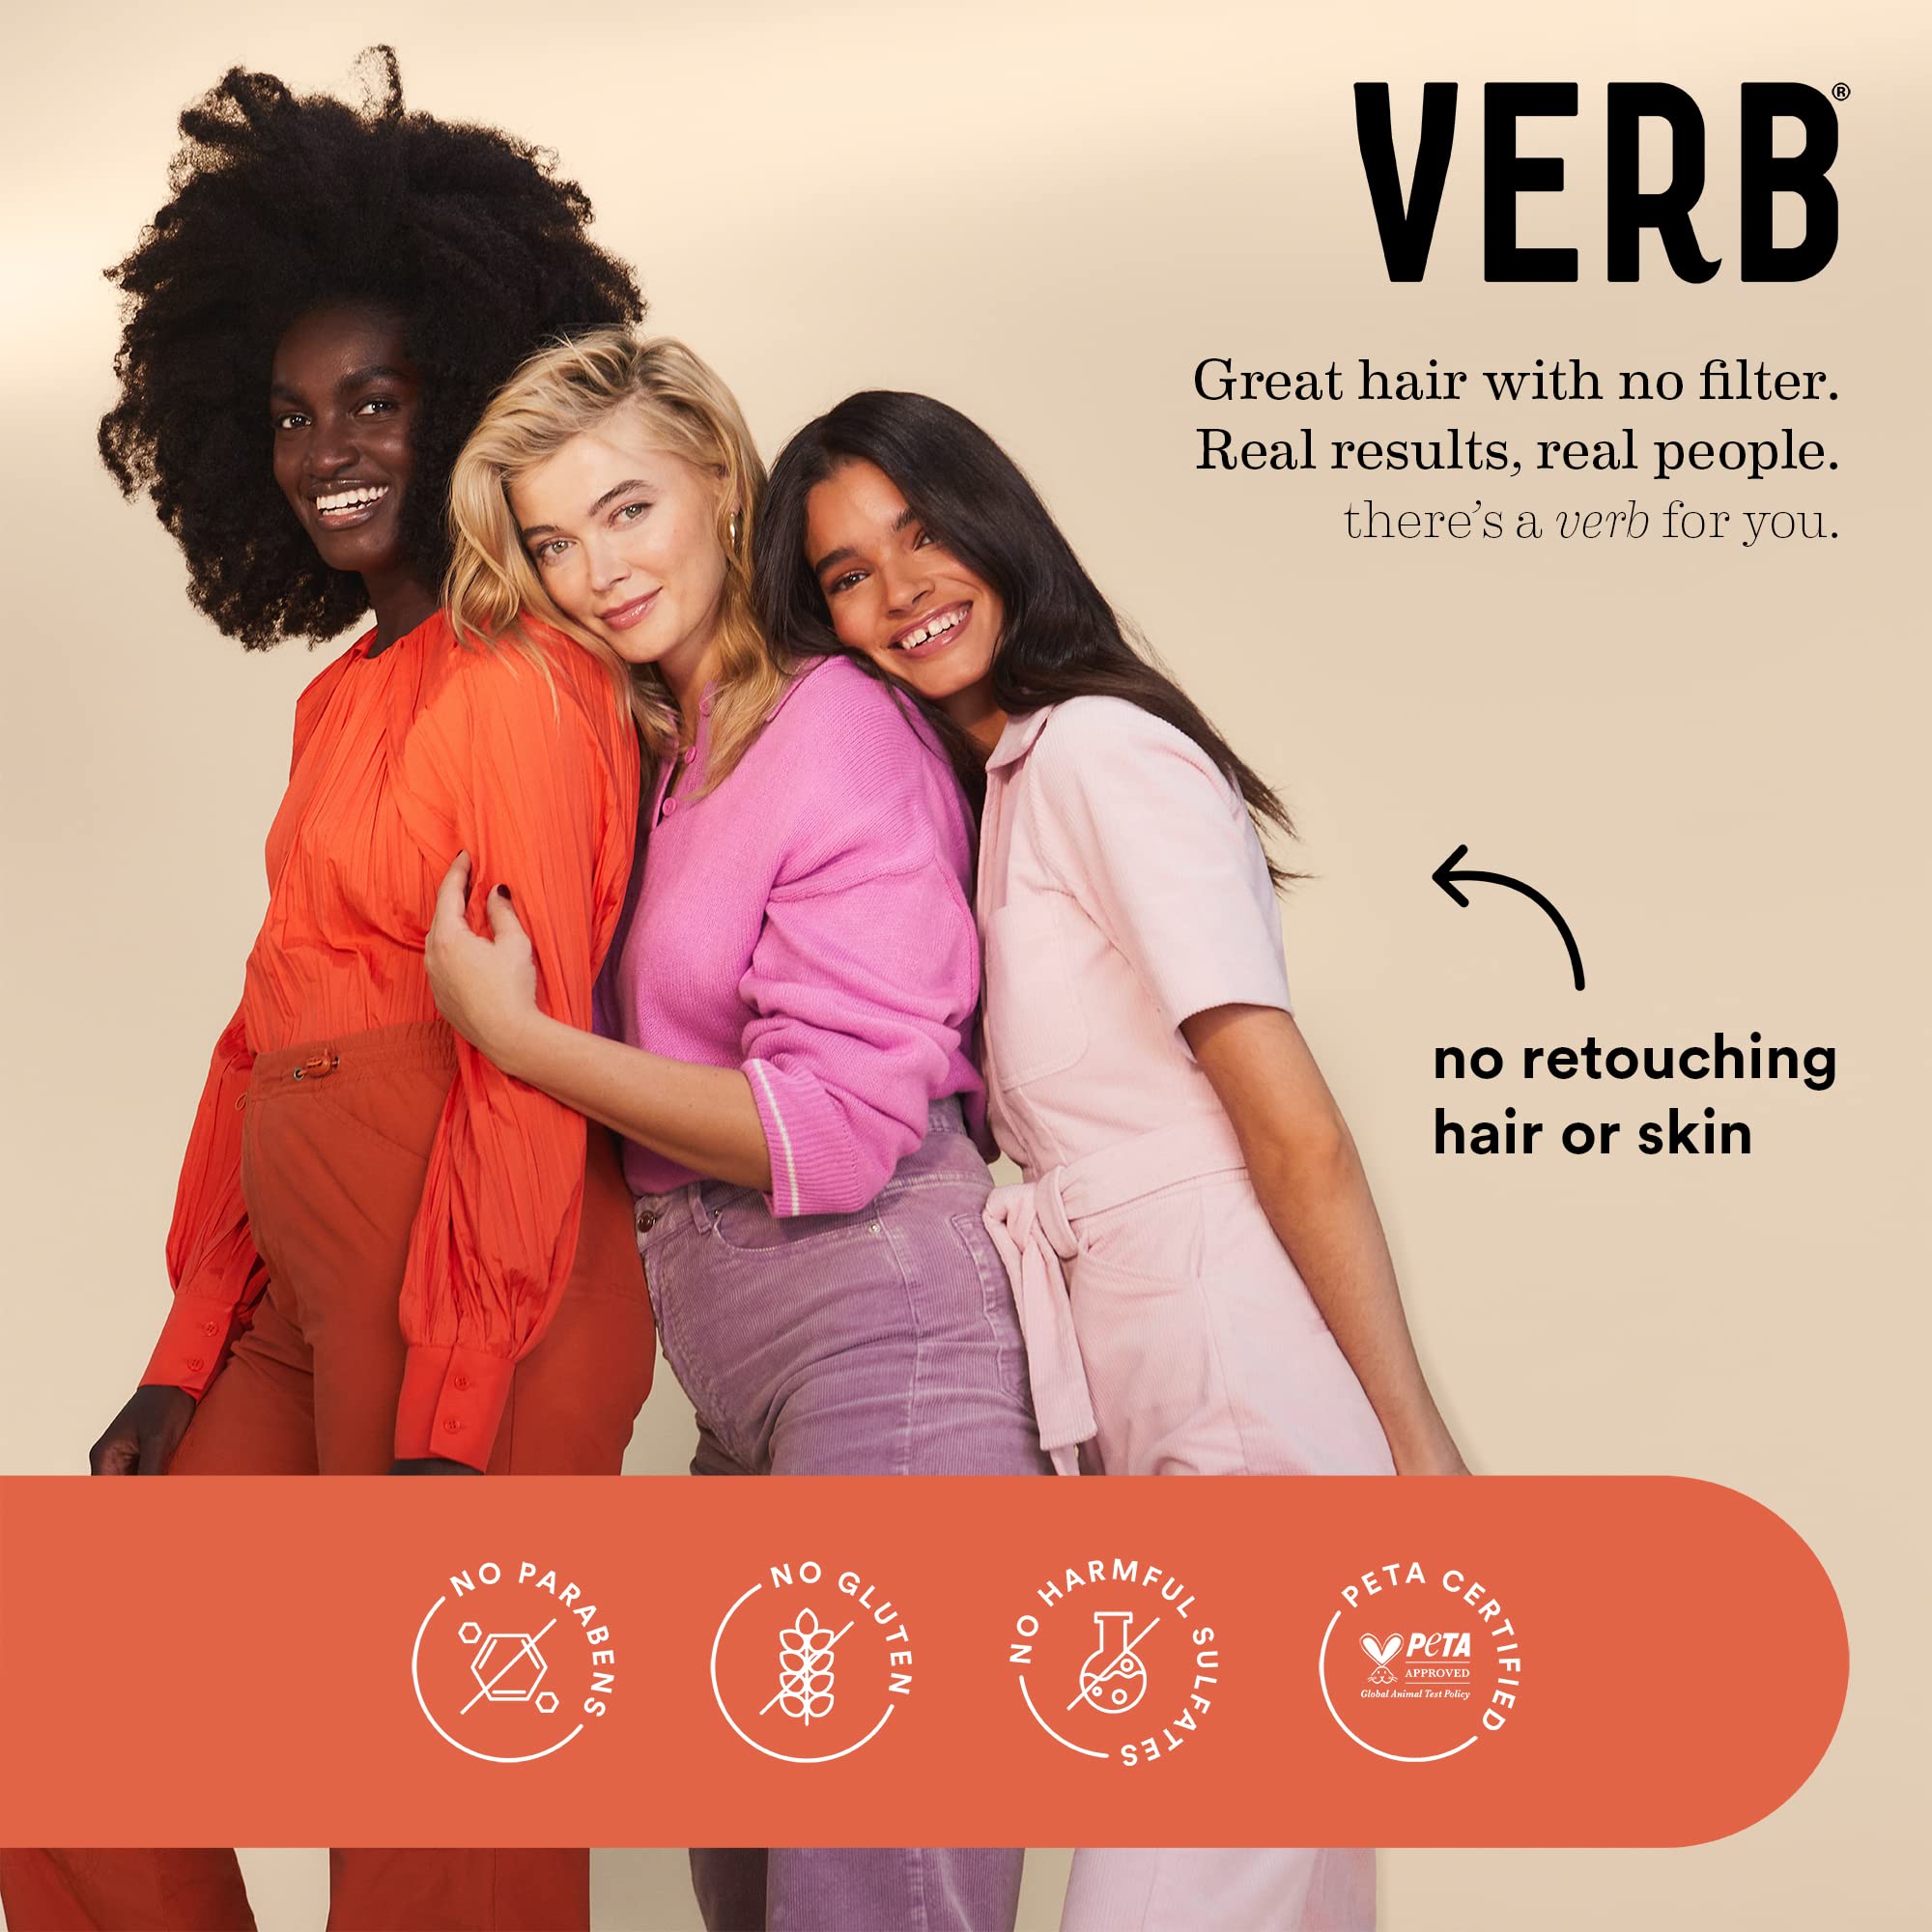 VERB Volume Texture Powder - Root Lift & Lightweight Hold - Volumizing & Texturizing Dry Powder for Full, Lifted Styles - Vegan Amplifying Powder for Fine or Flat Hair With No Harmful Sulfates 0.1 oz